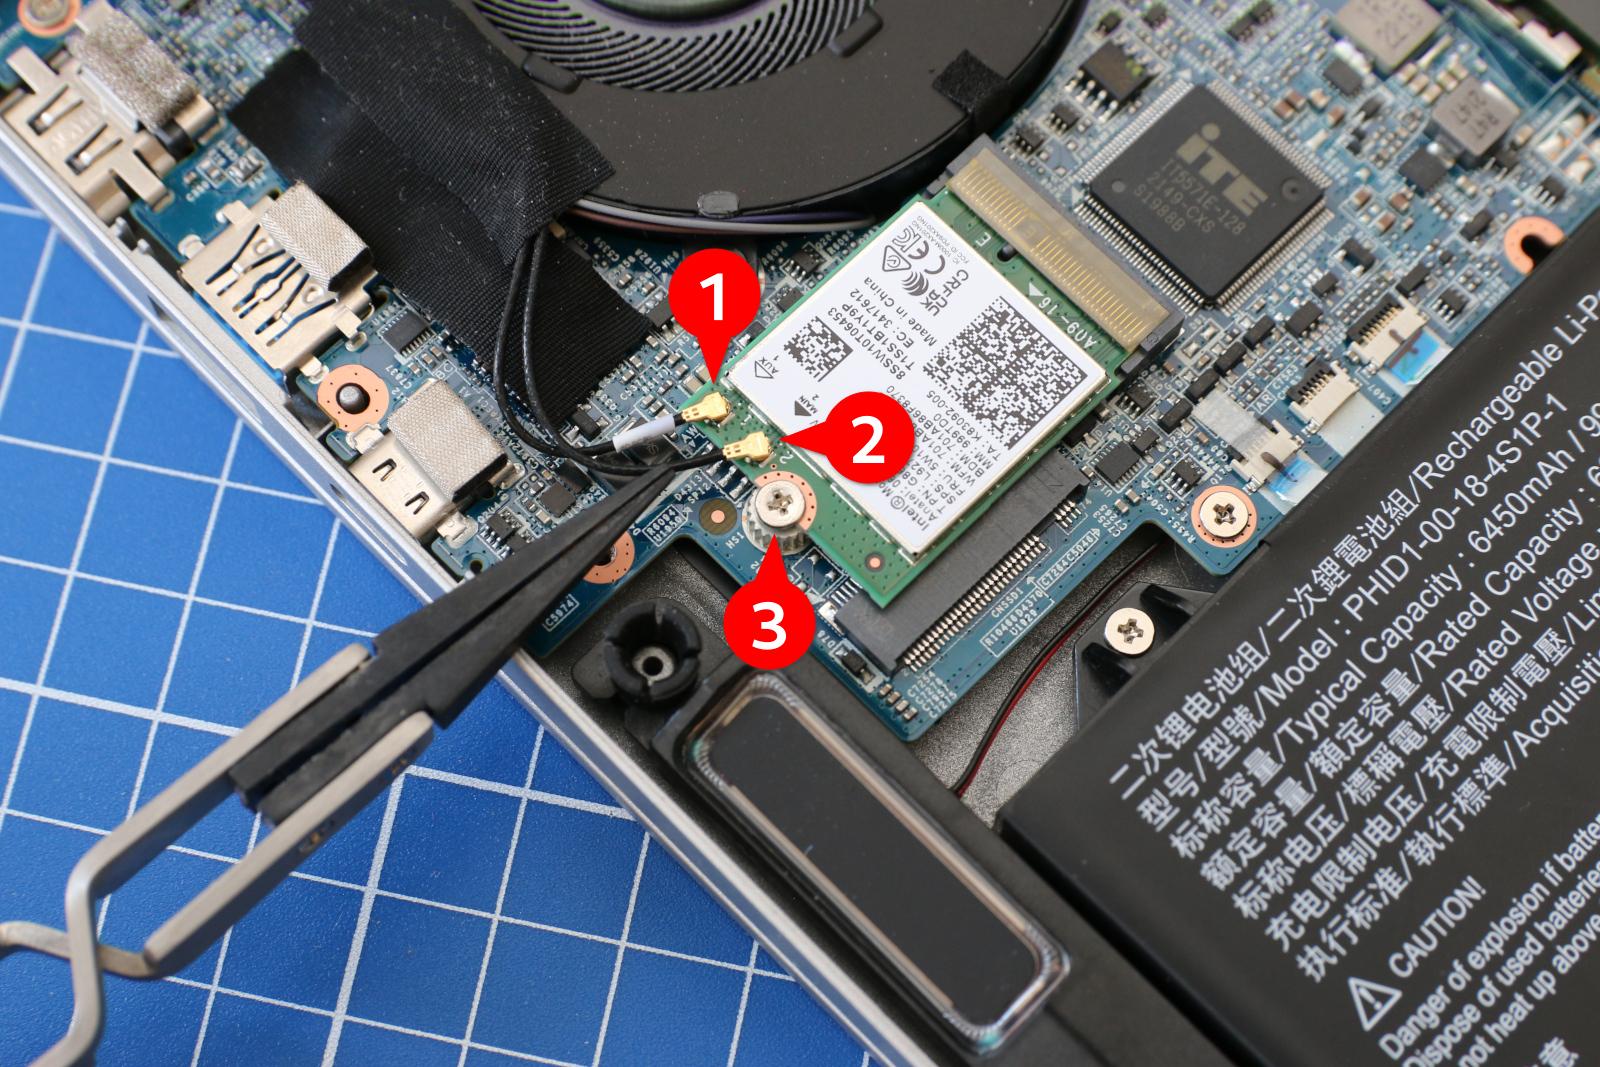 The antennas for WiFi and Bluetooth, which are usually built into the frame of the screen, are connected to the WLAN card with filigree plugs. When plugging in, make sure that the plugs are correctly seated on the sockets.